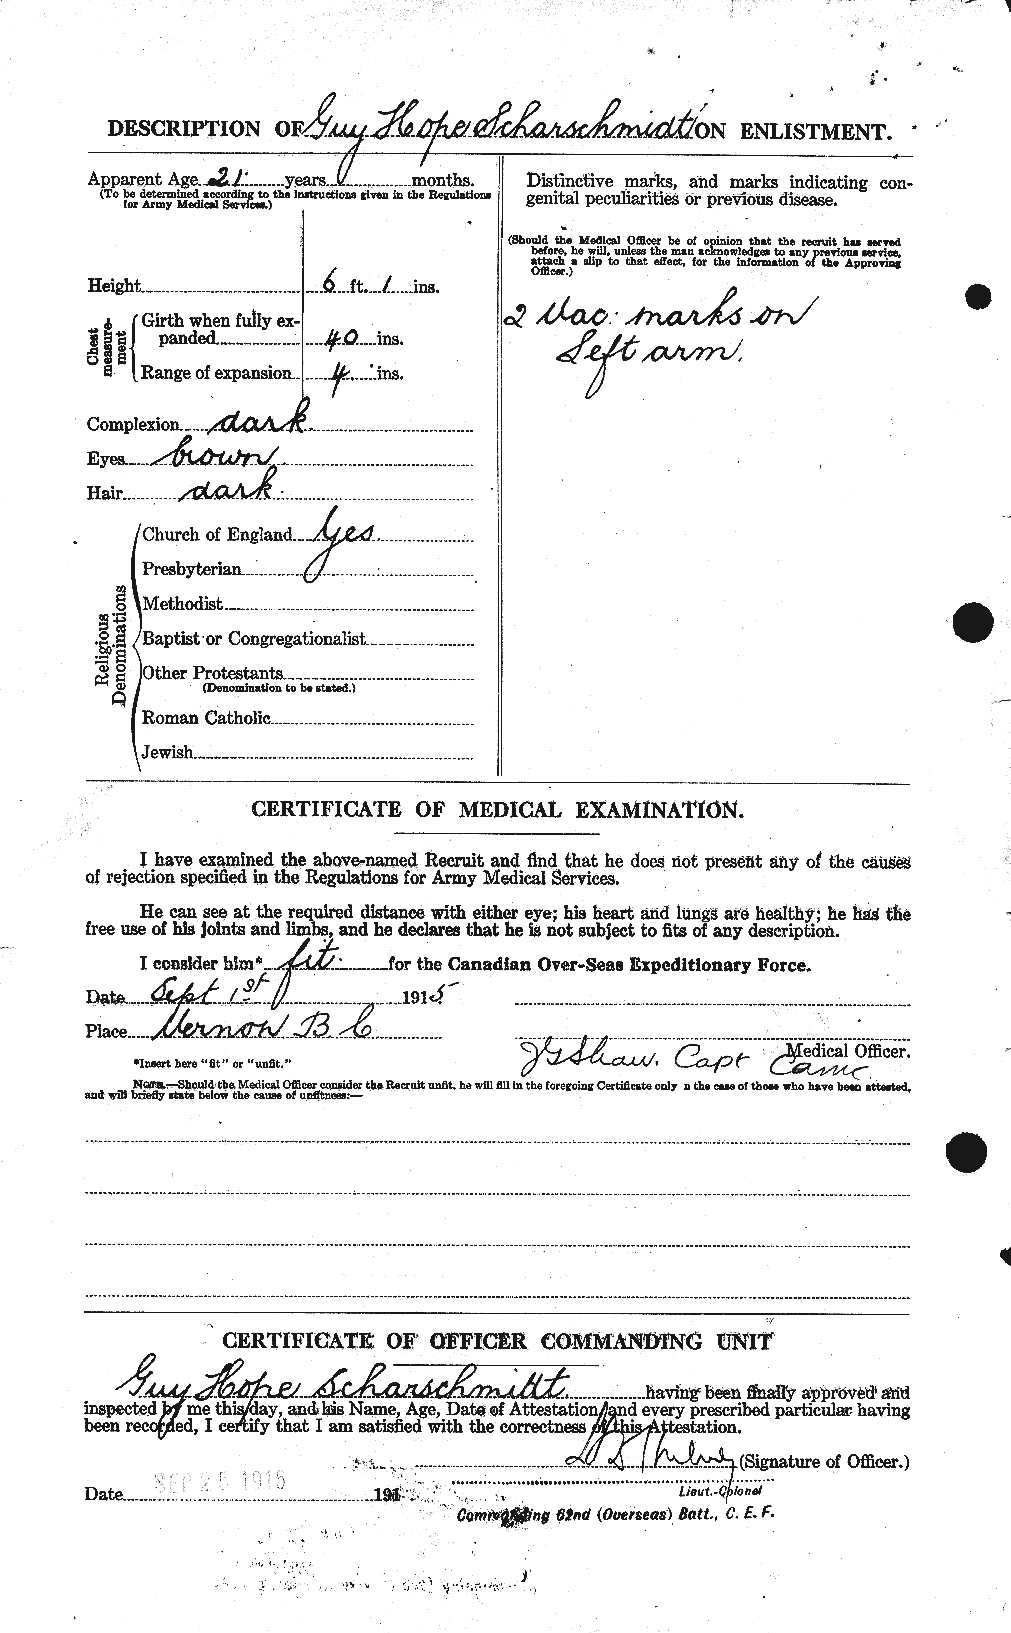 Personnel Records of the First World War - CEF 081139b